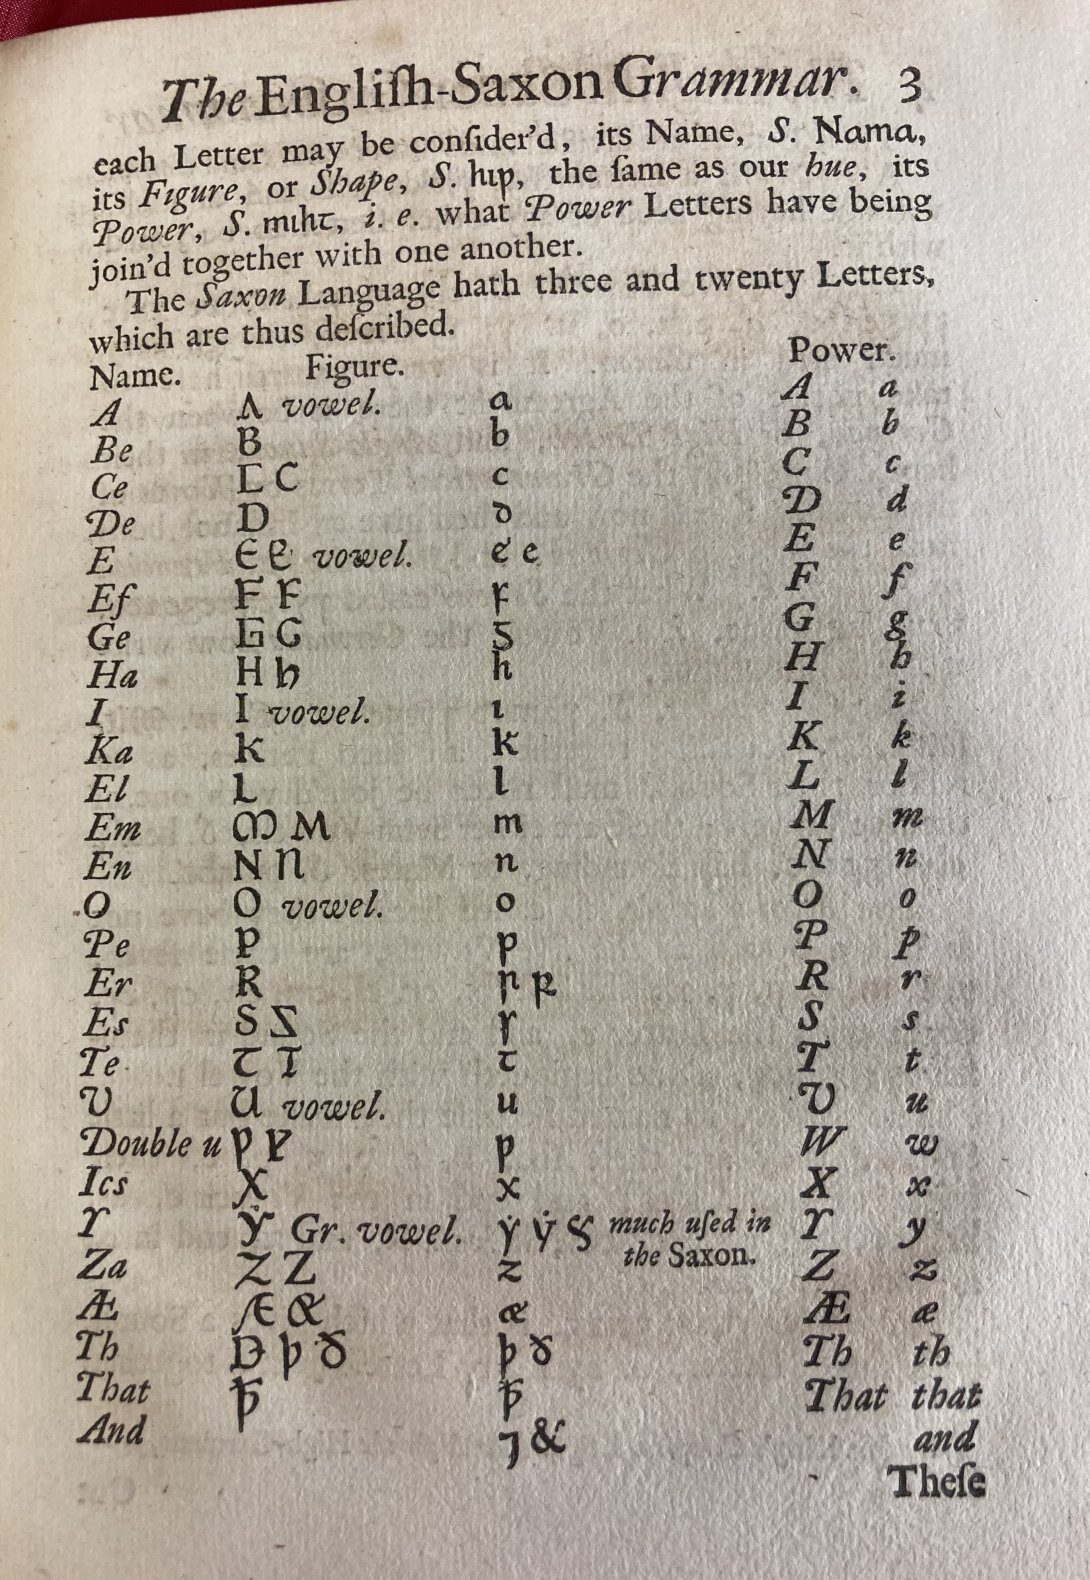 Image of Saxon and English letters in a table format